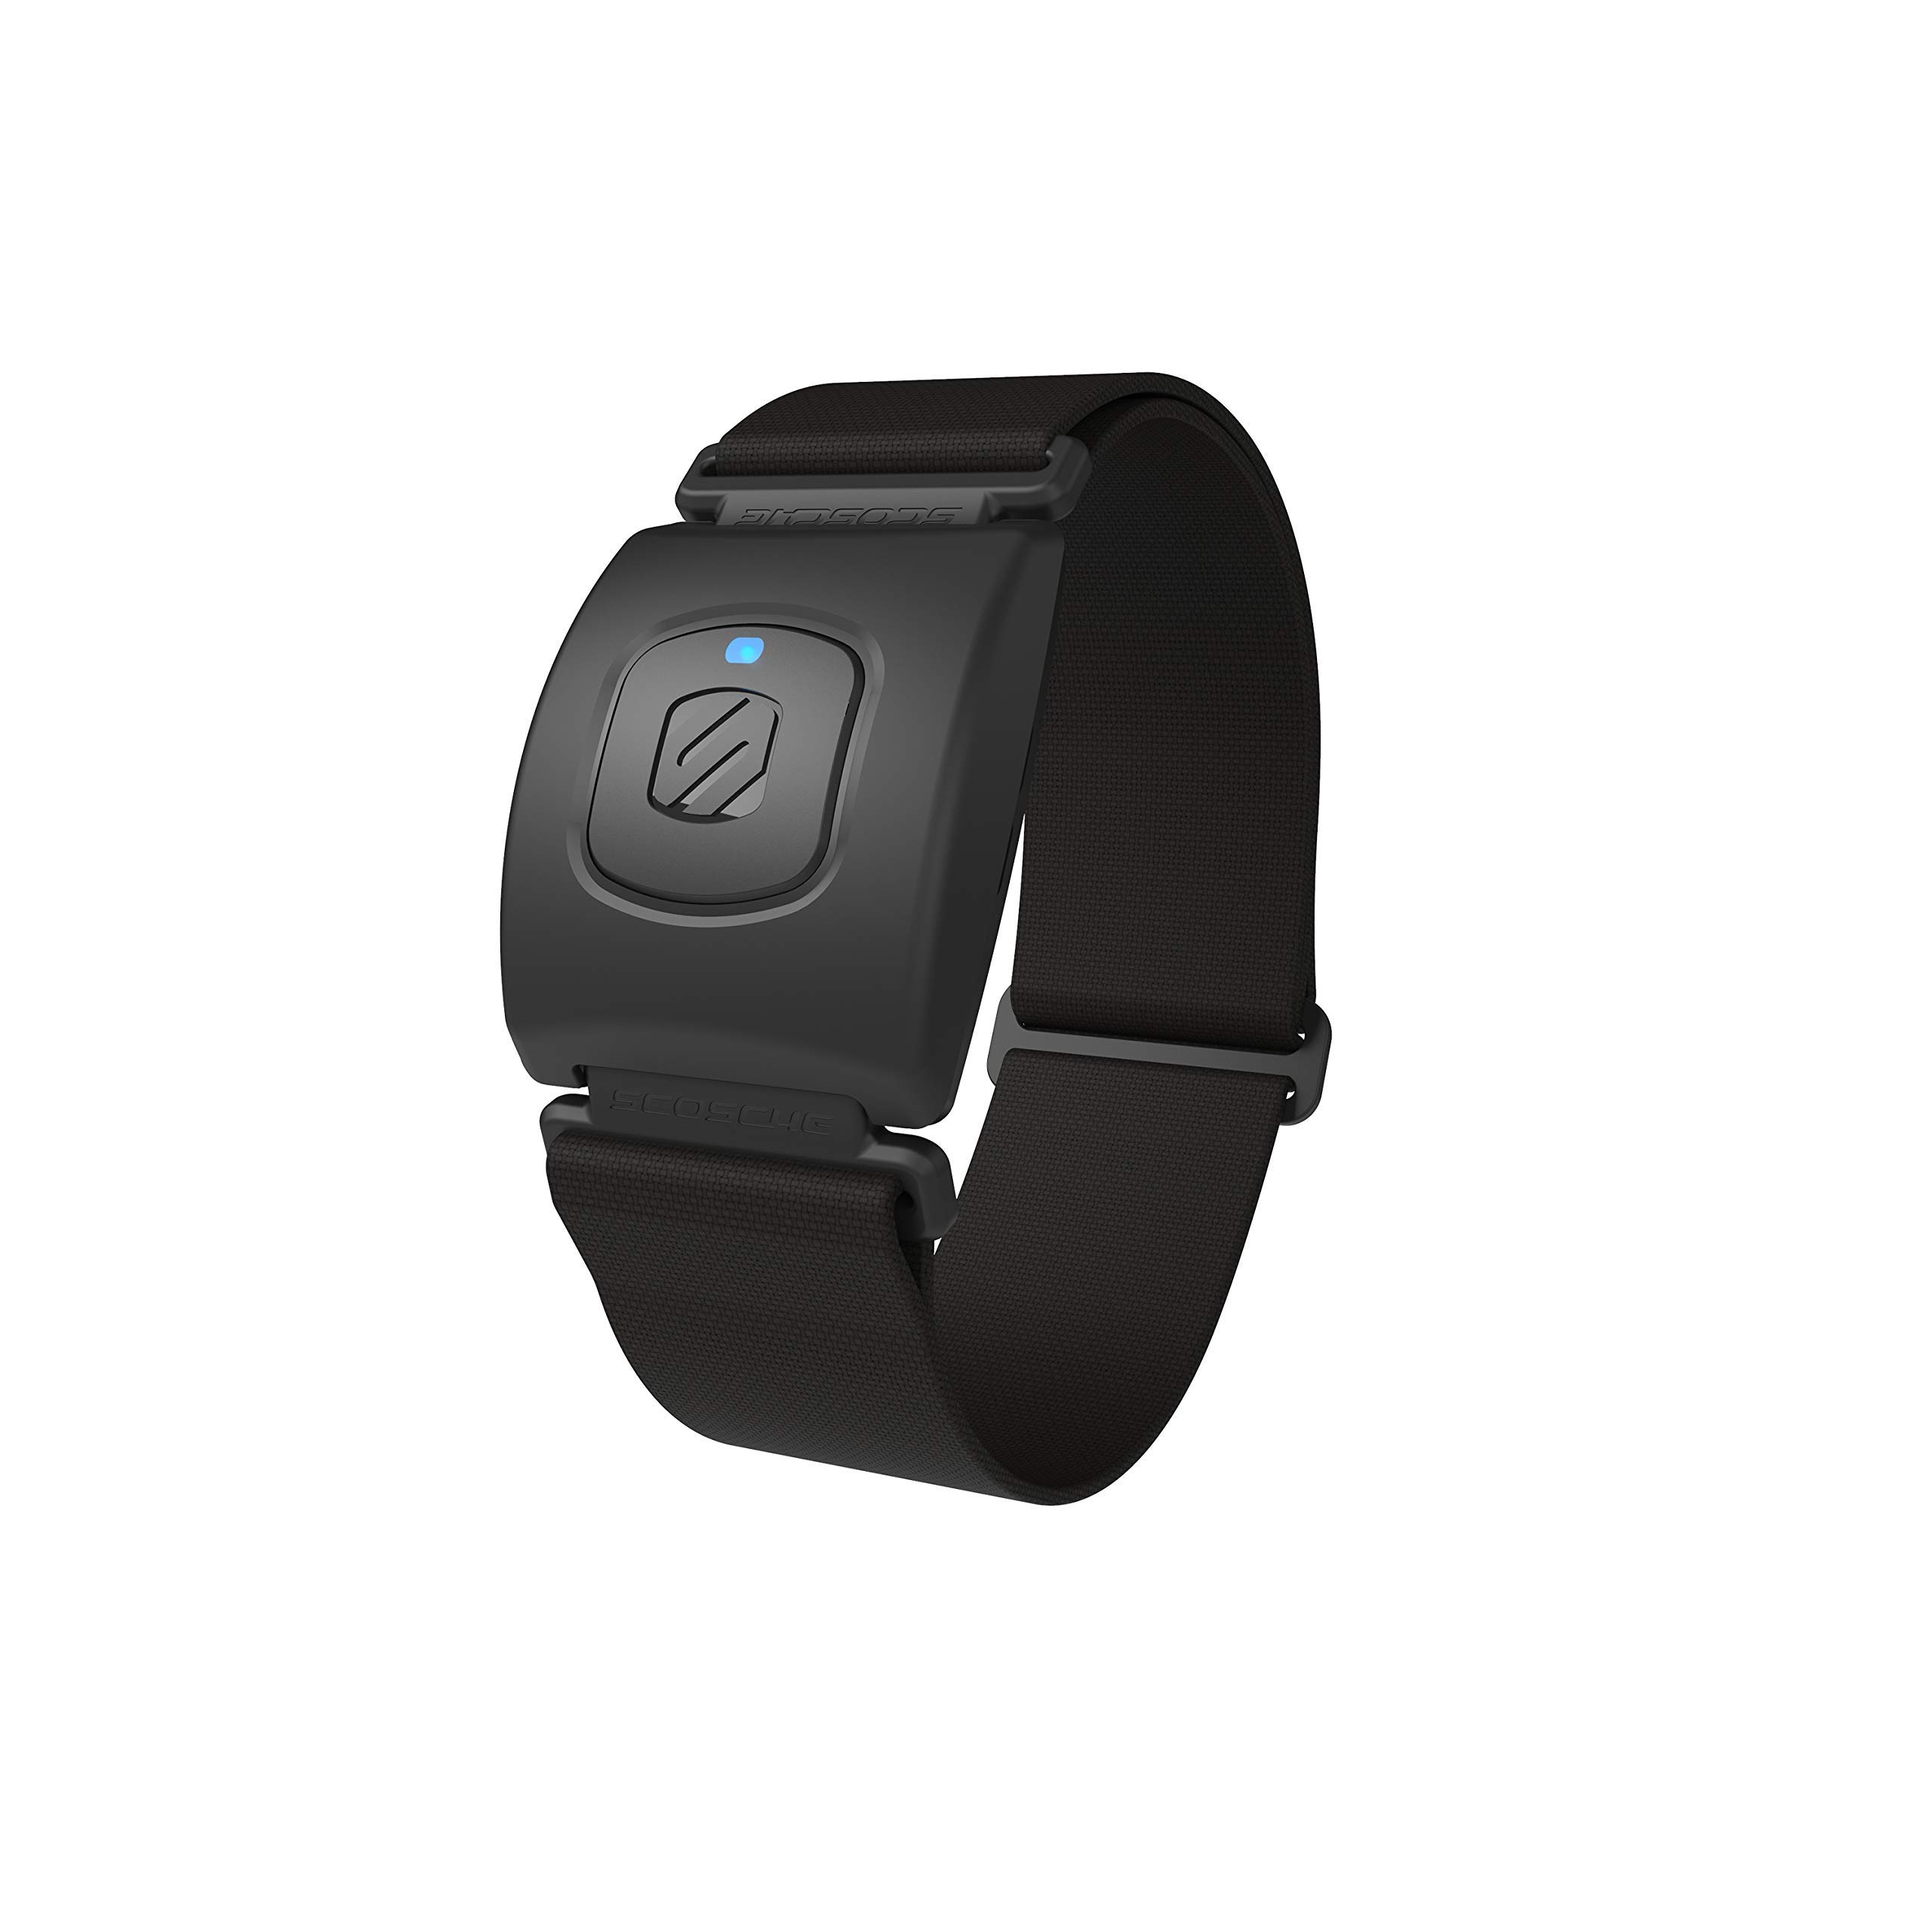 Bluetooth Smart and ANT+ Heart Rate Monitor